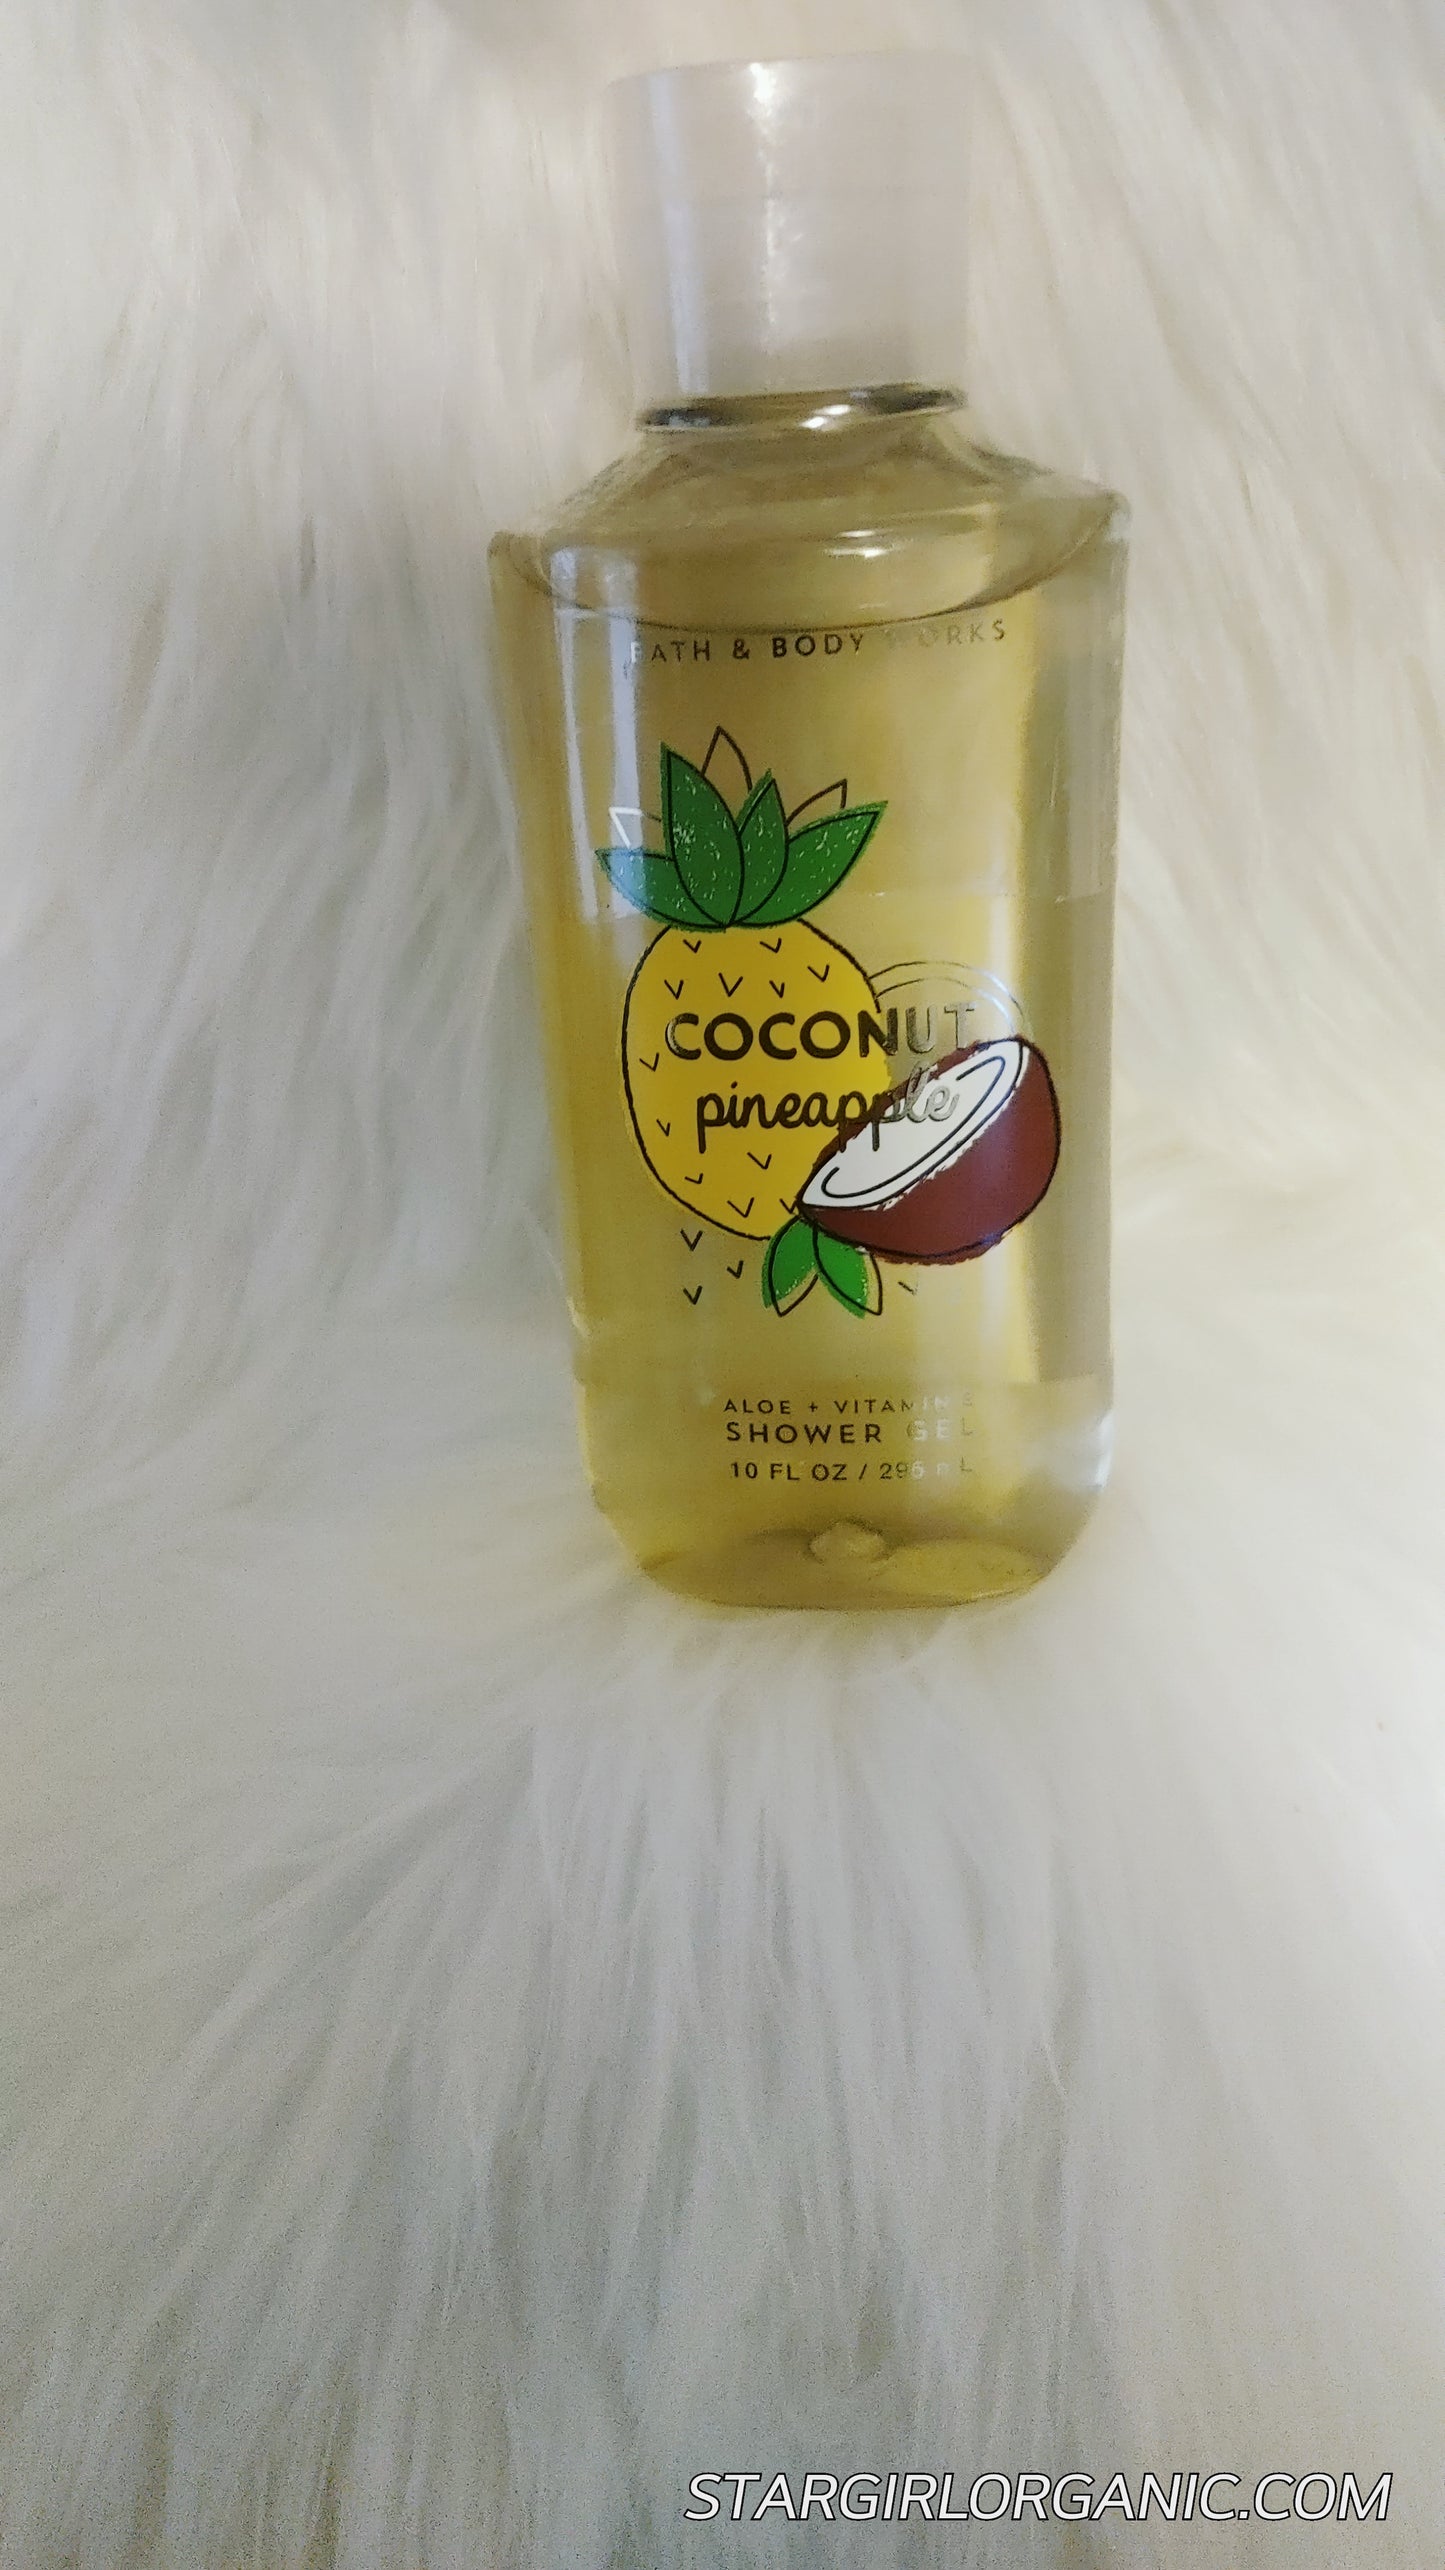 Bath and Body Works Coconut Pineapple Shower Gel